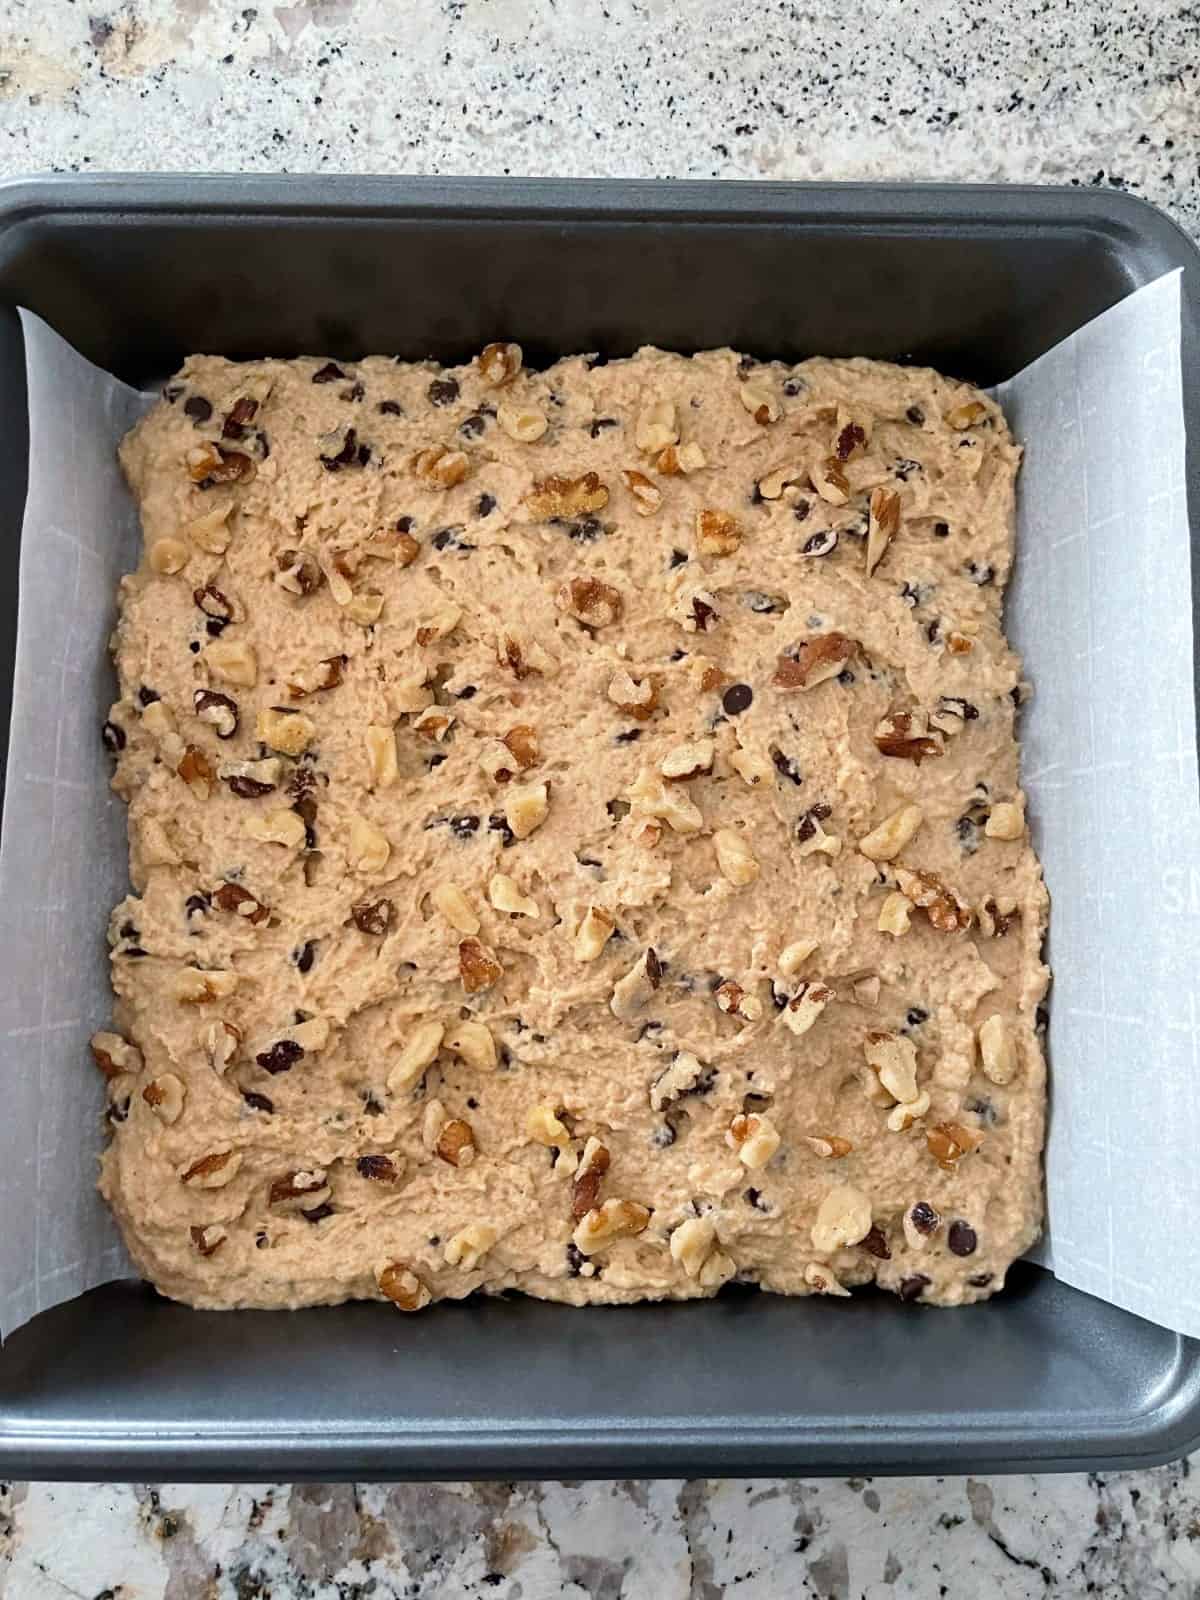 Unbaked chocolate chip Kodiak quick cake in parchment lined baking pan.